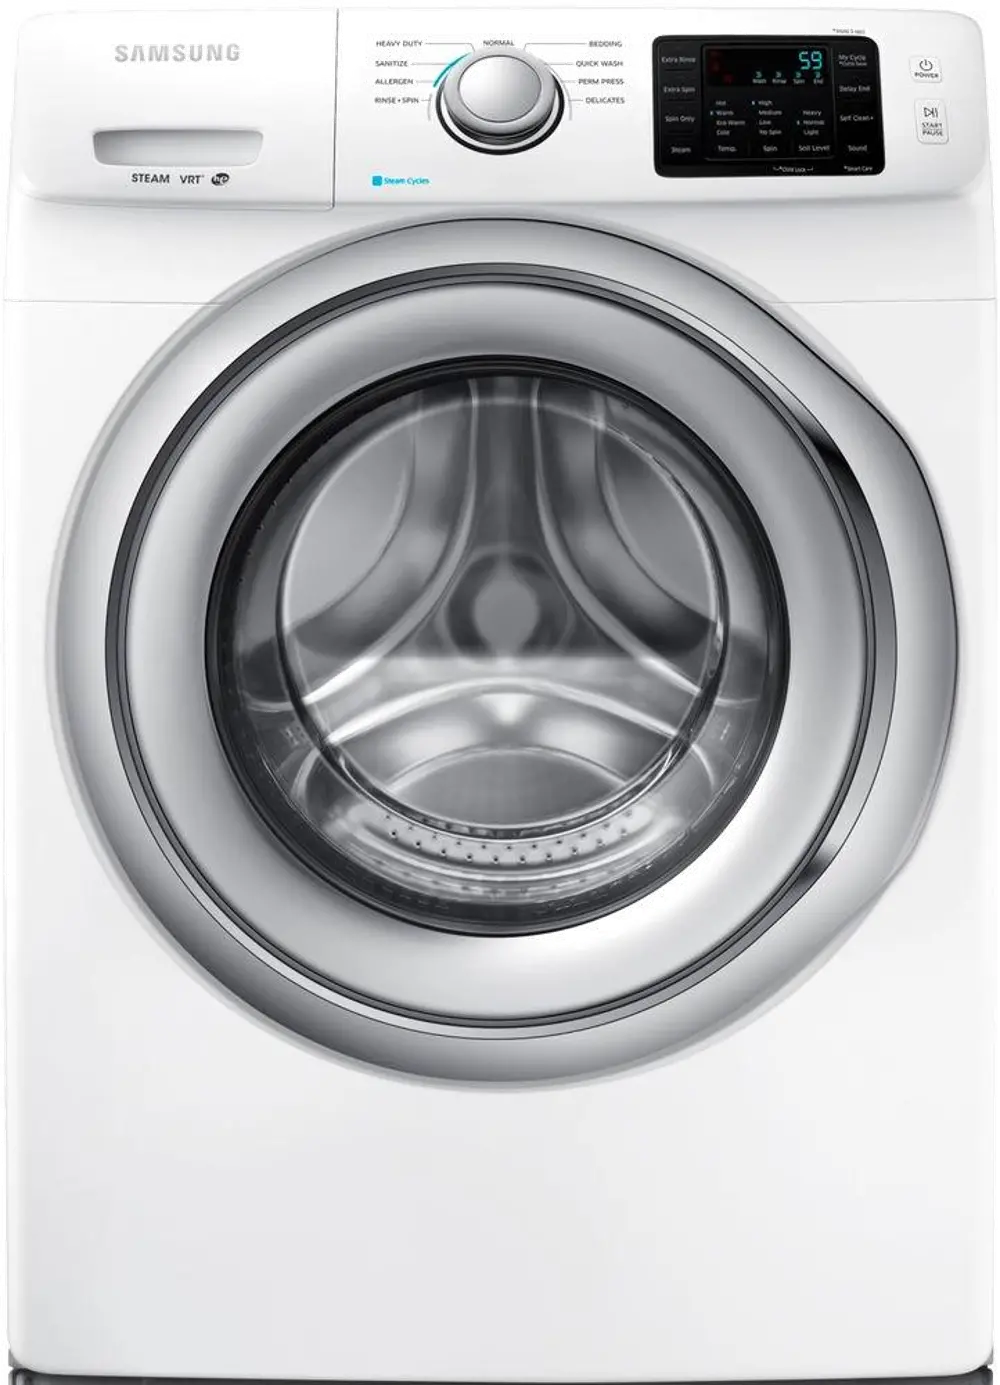 WF42H5200AW Samsung 4.2 cu. ft. Front Load Washer - White-1